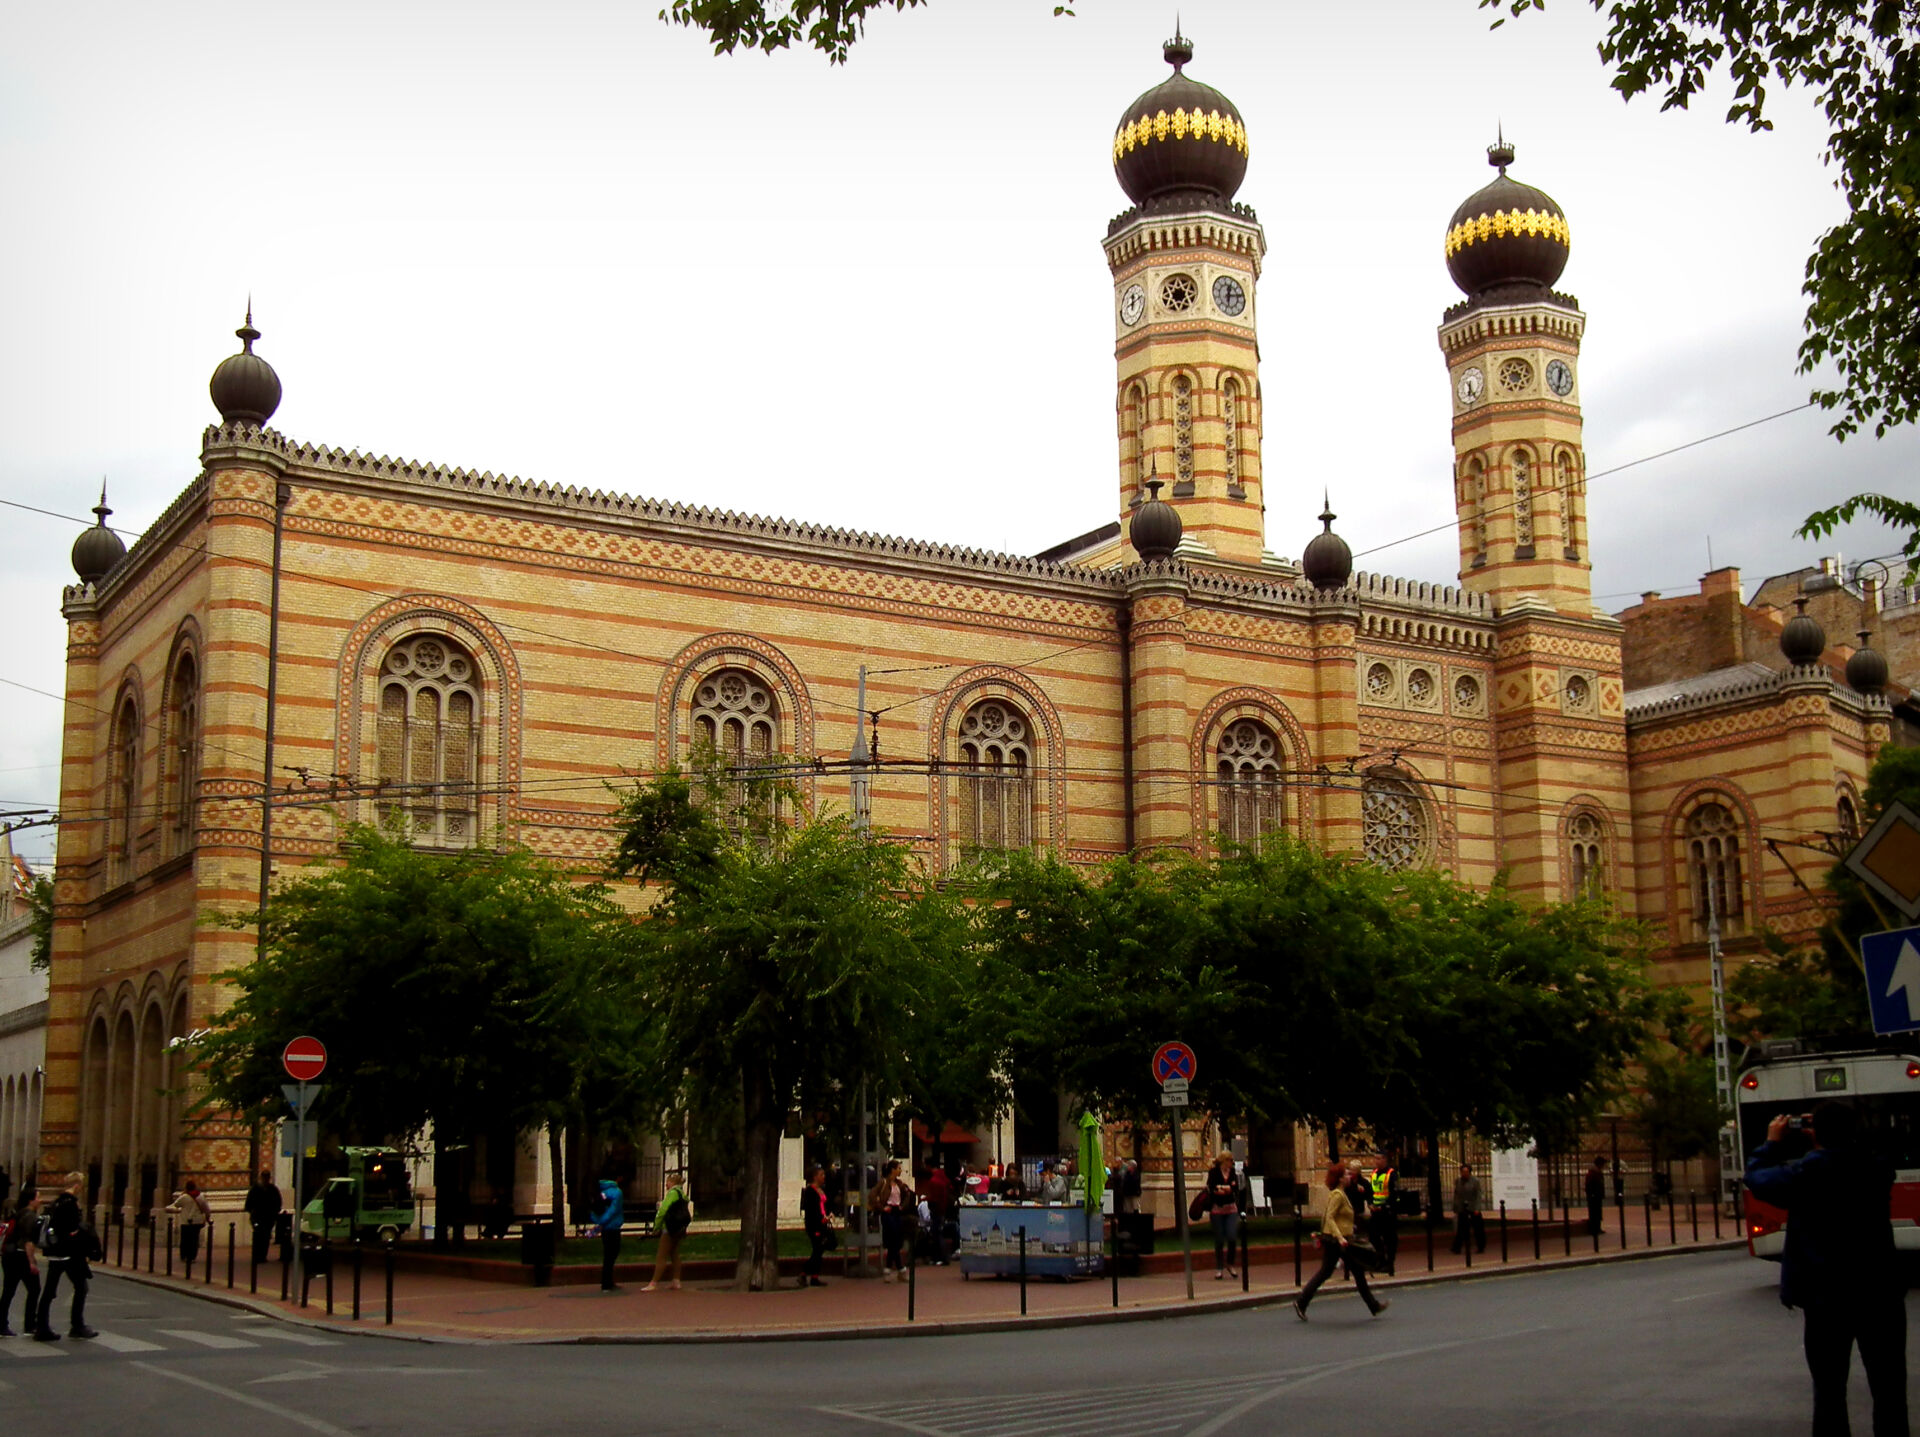 The exterior of the Dohány Street Great Synagogue